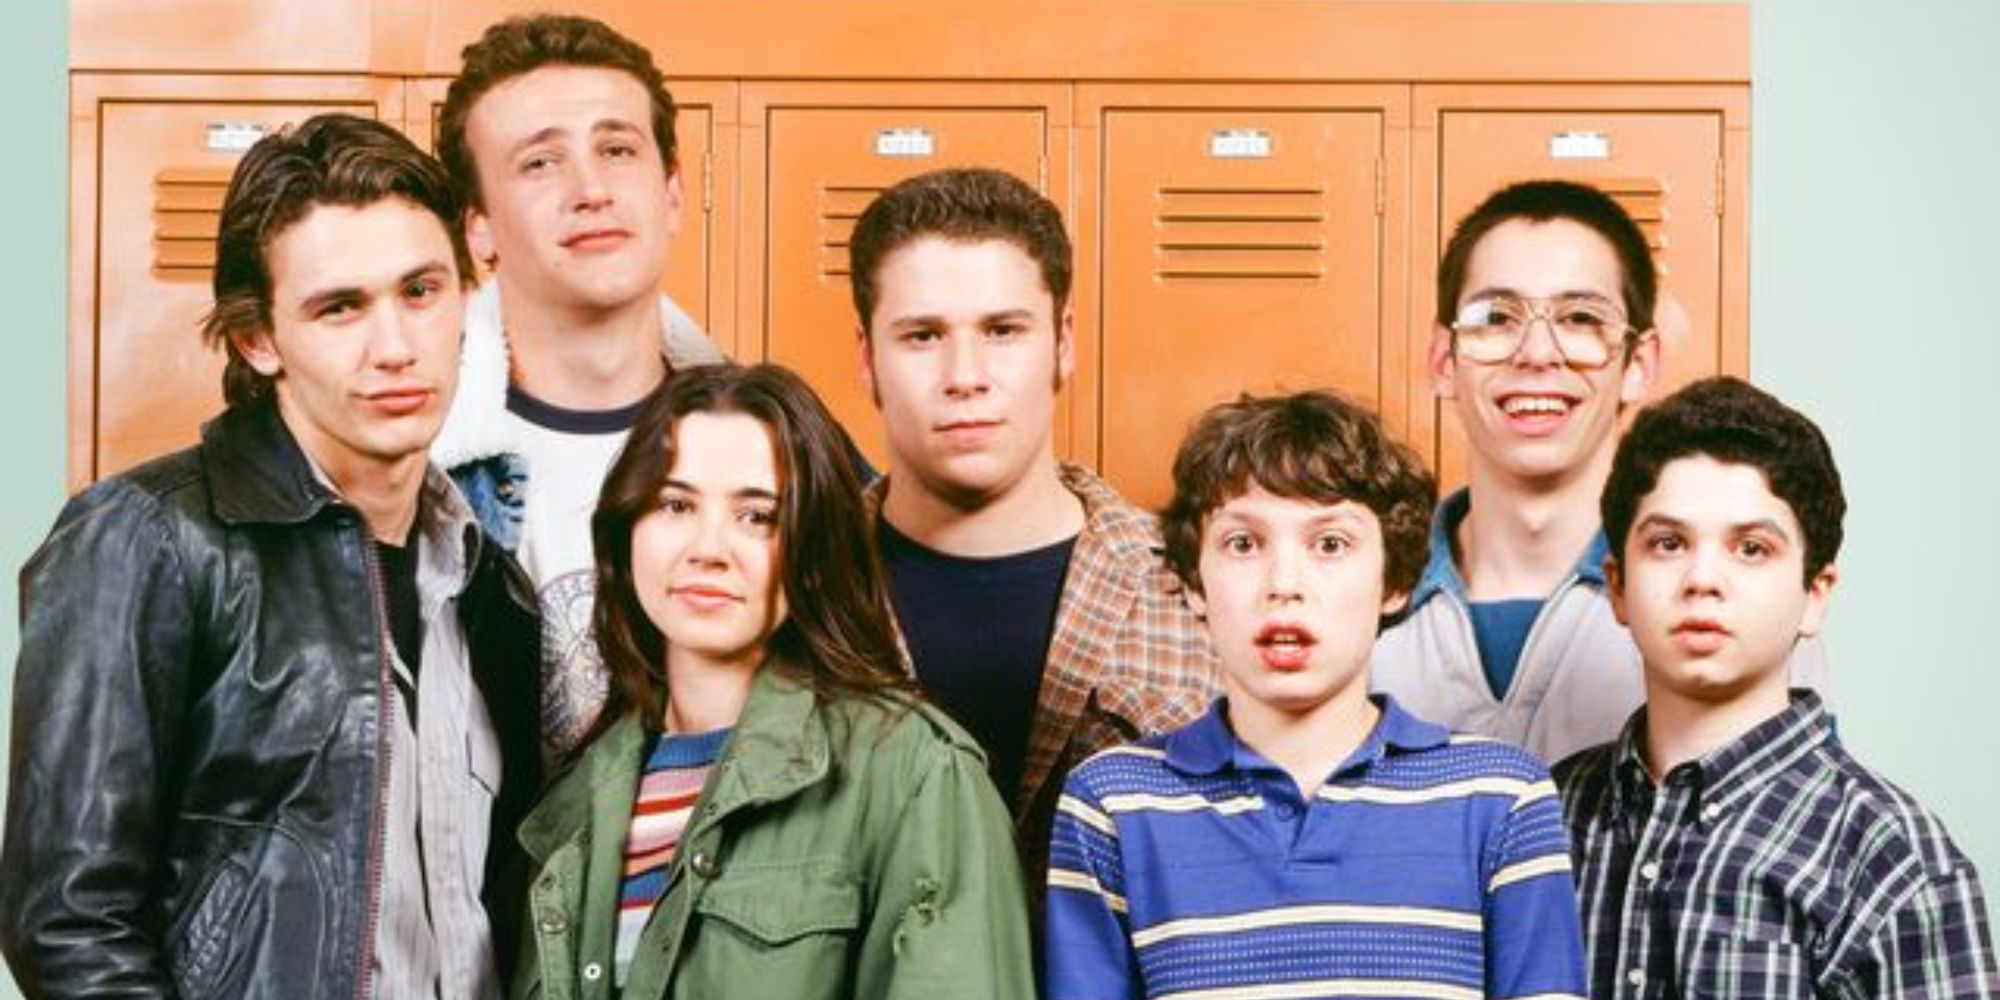 The cast of 'Freaks and Geeks' in front of orange lockers.